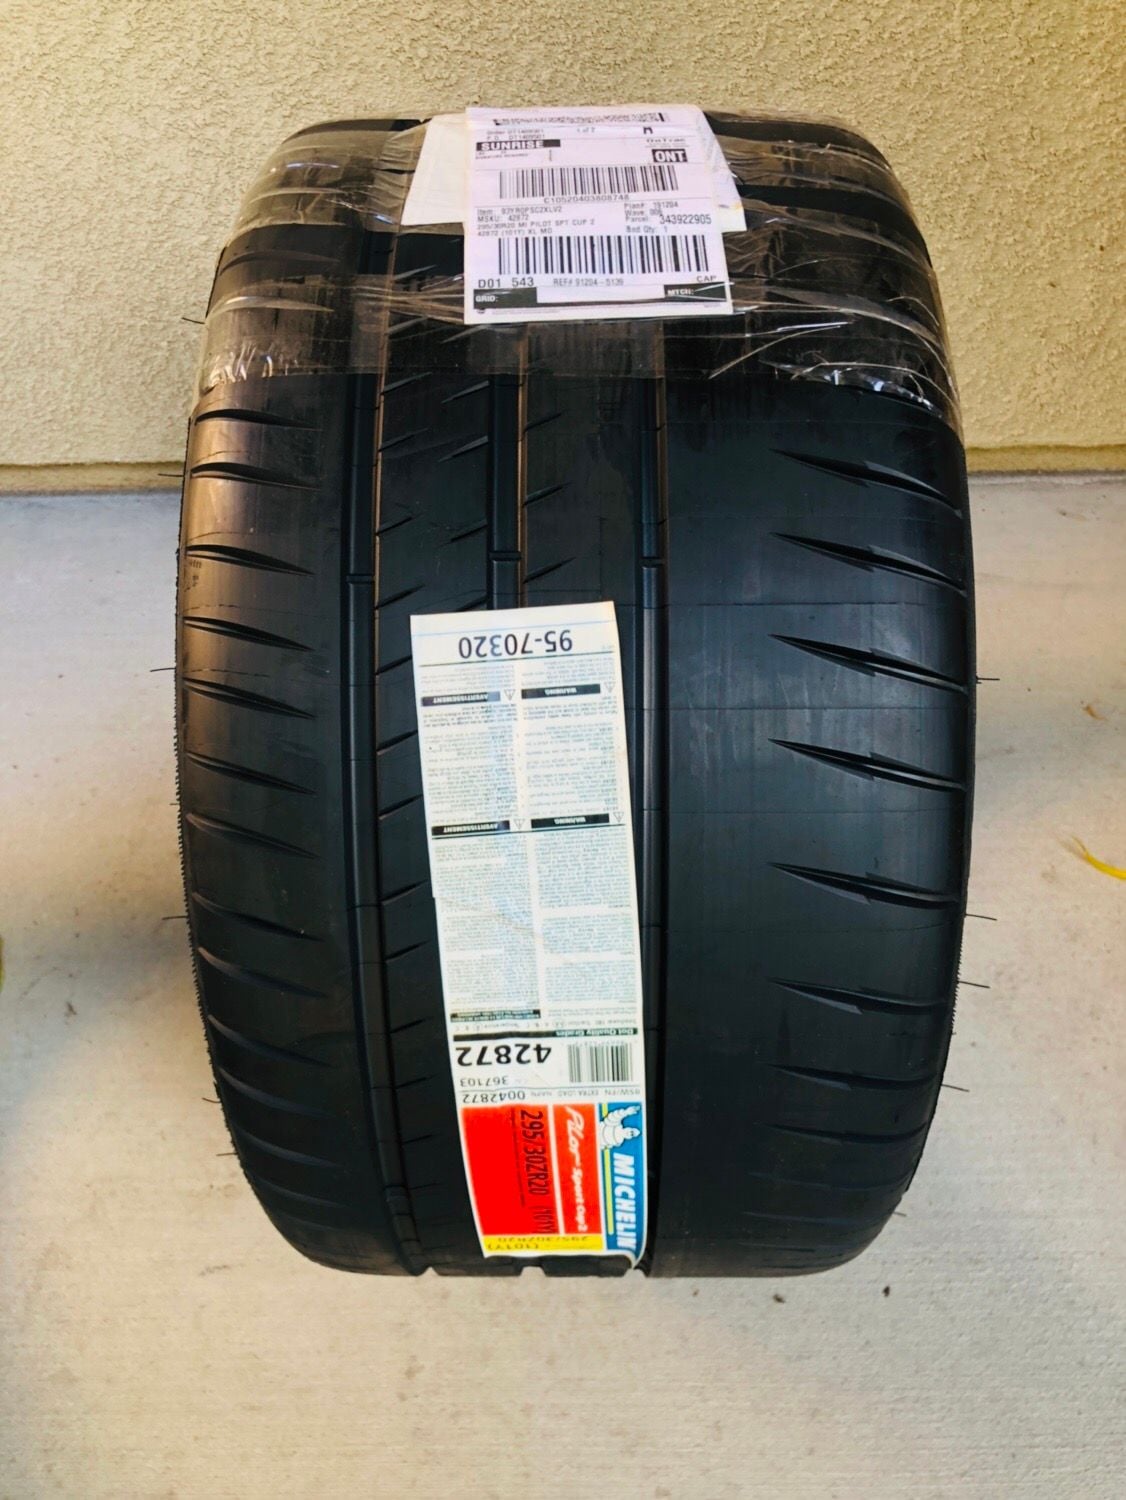 Wheels and Tires/Axles - Michelin Pilot Sport Cup 2 - New - 2018 to 2019 Mercedes-Benz E63 AMG S - Diamond Bar, CA 91765, United States